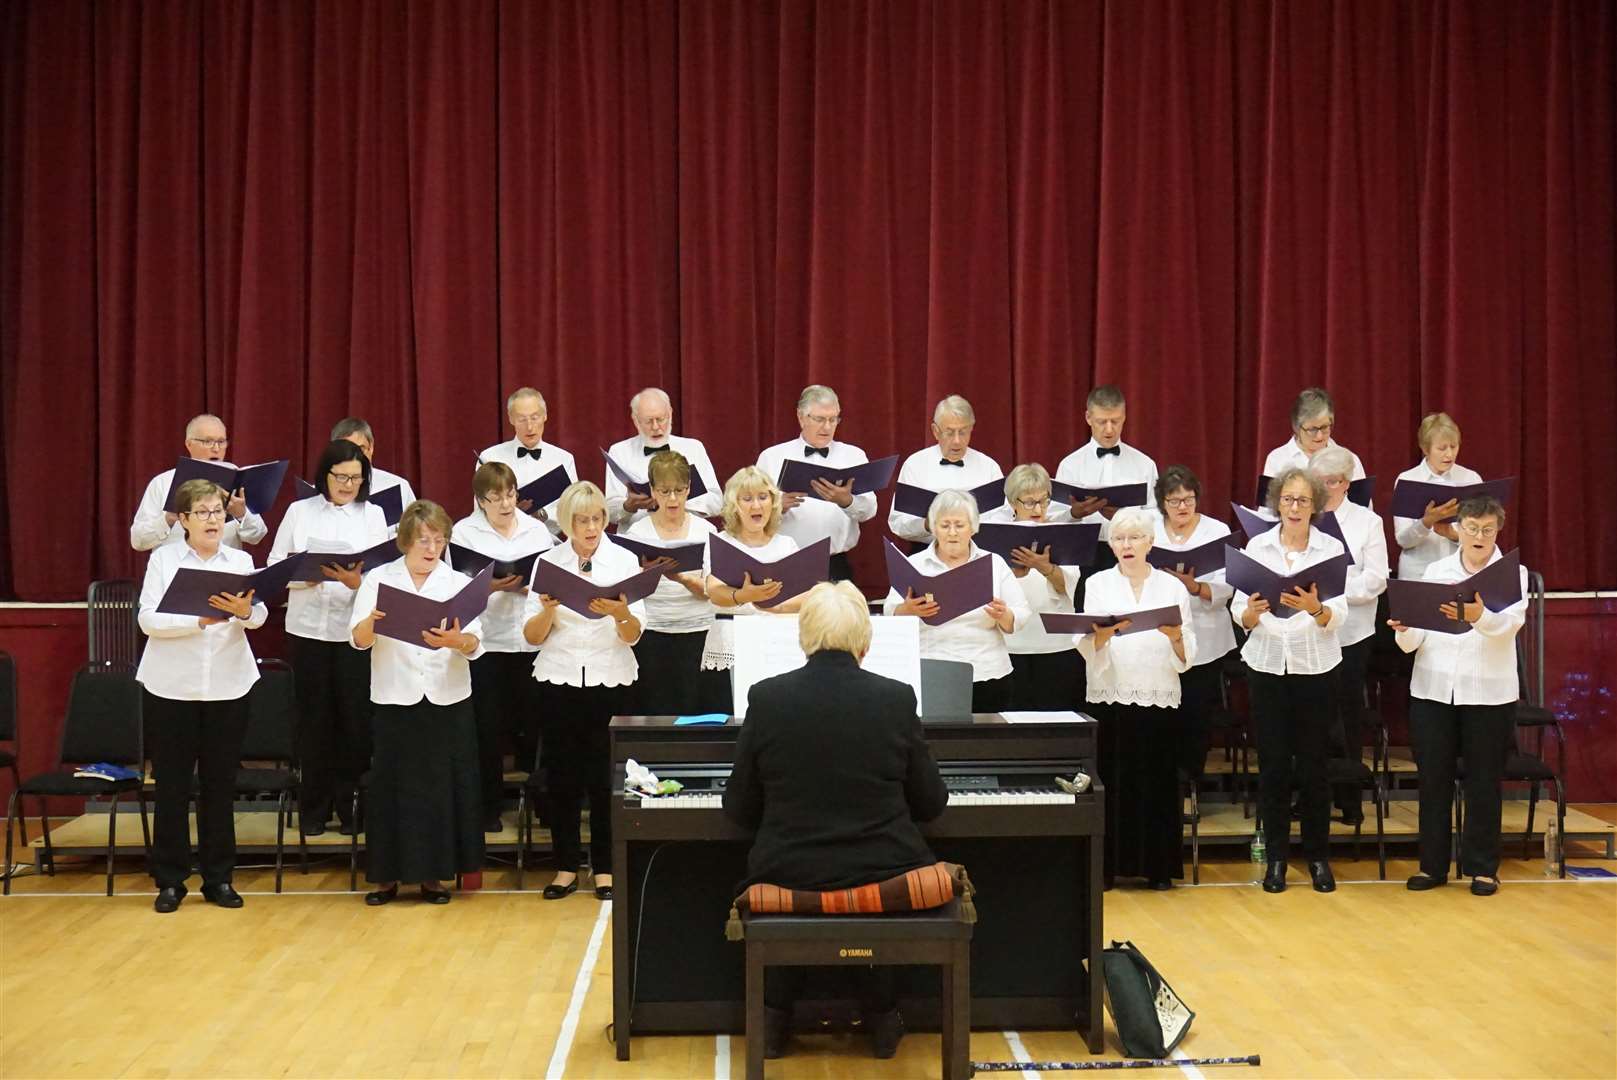 Tain Choral group in fine voice.